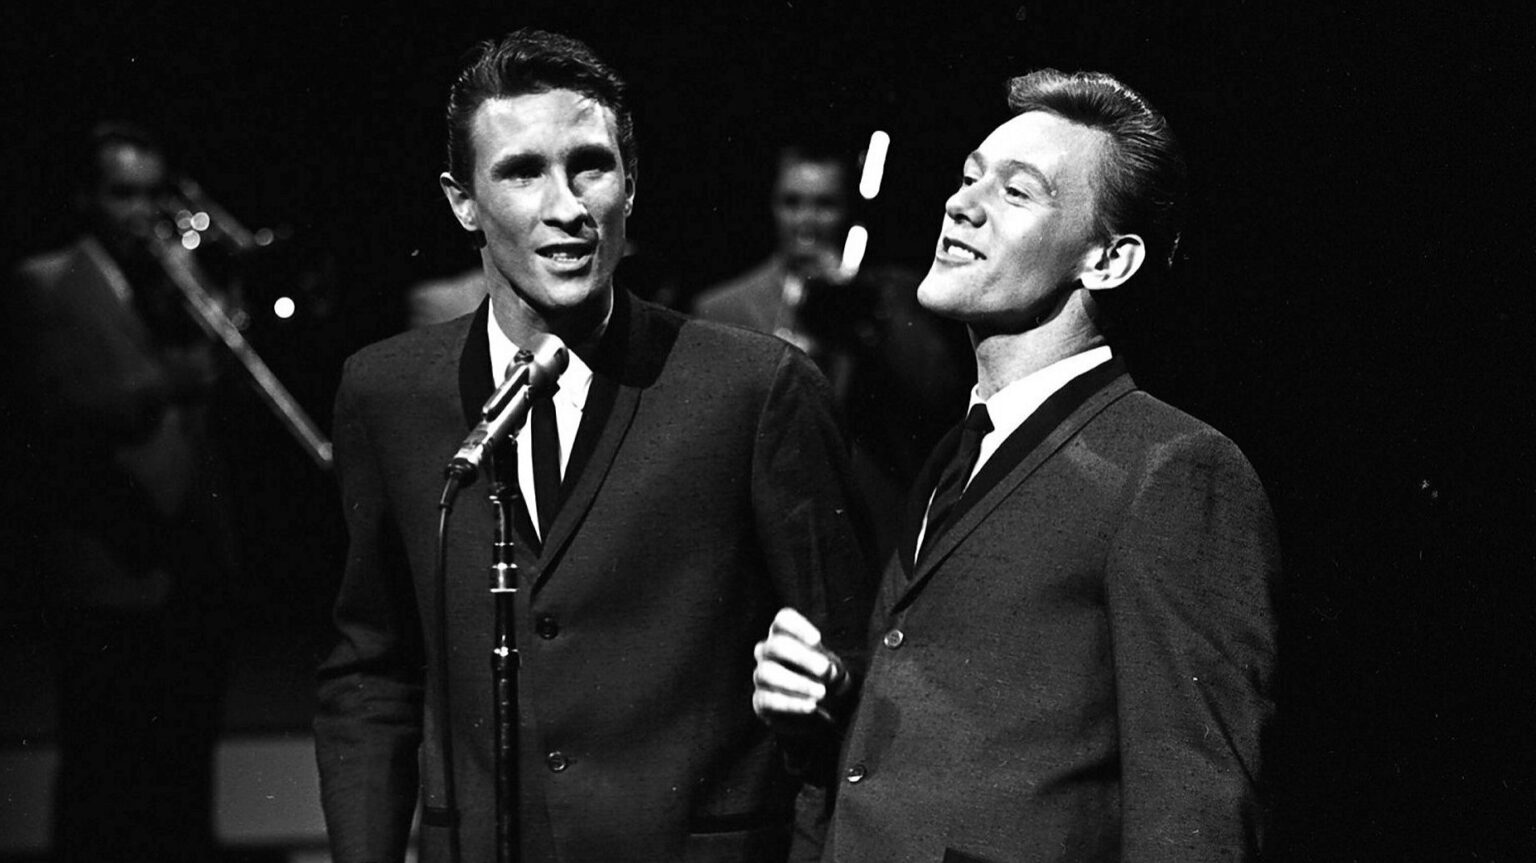 Unchained Melody The Righteous Brothers Amazing And Timeless Serenade 1955 The Website 3998